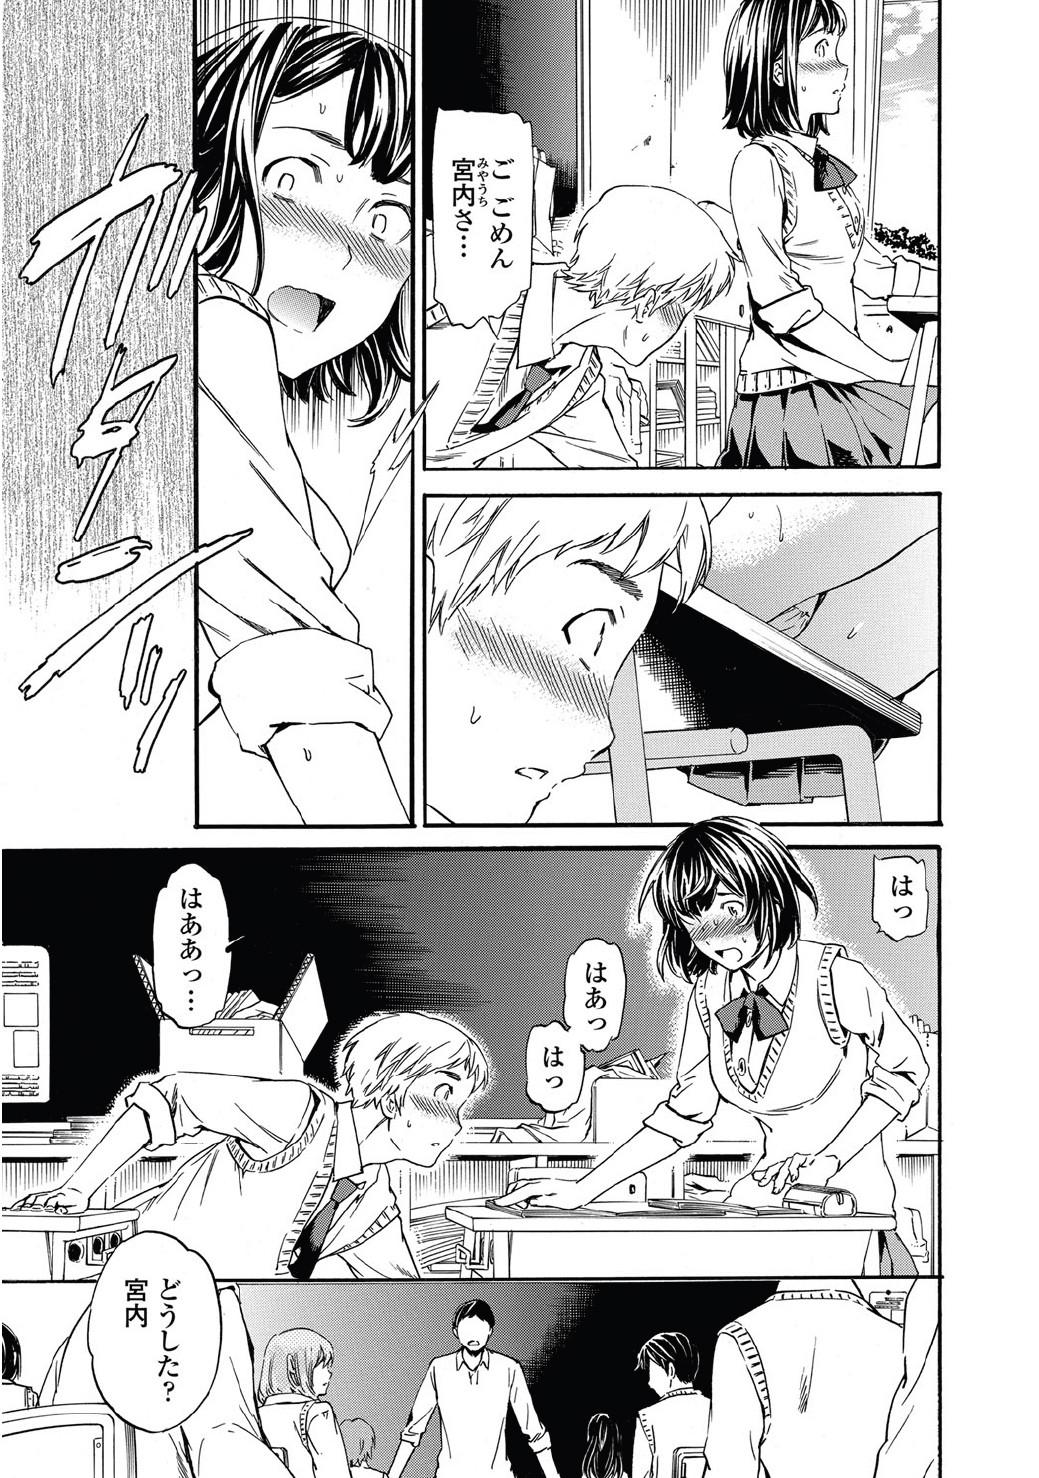 Hymen Link Ch.01-02 Cruising - Page 7